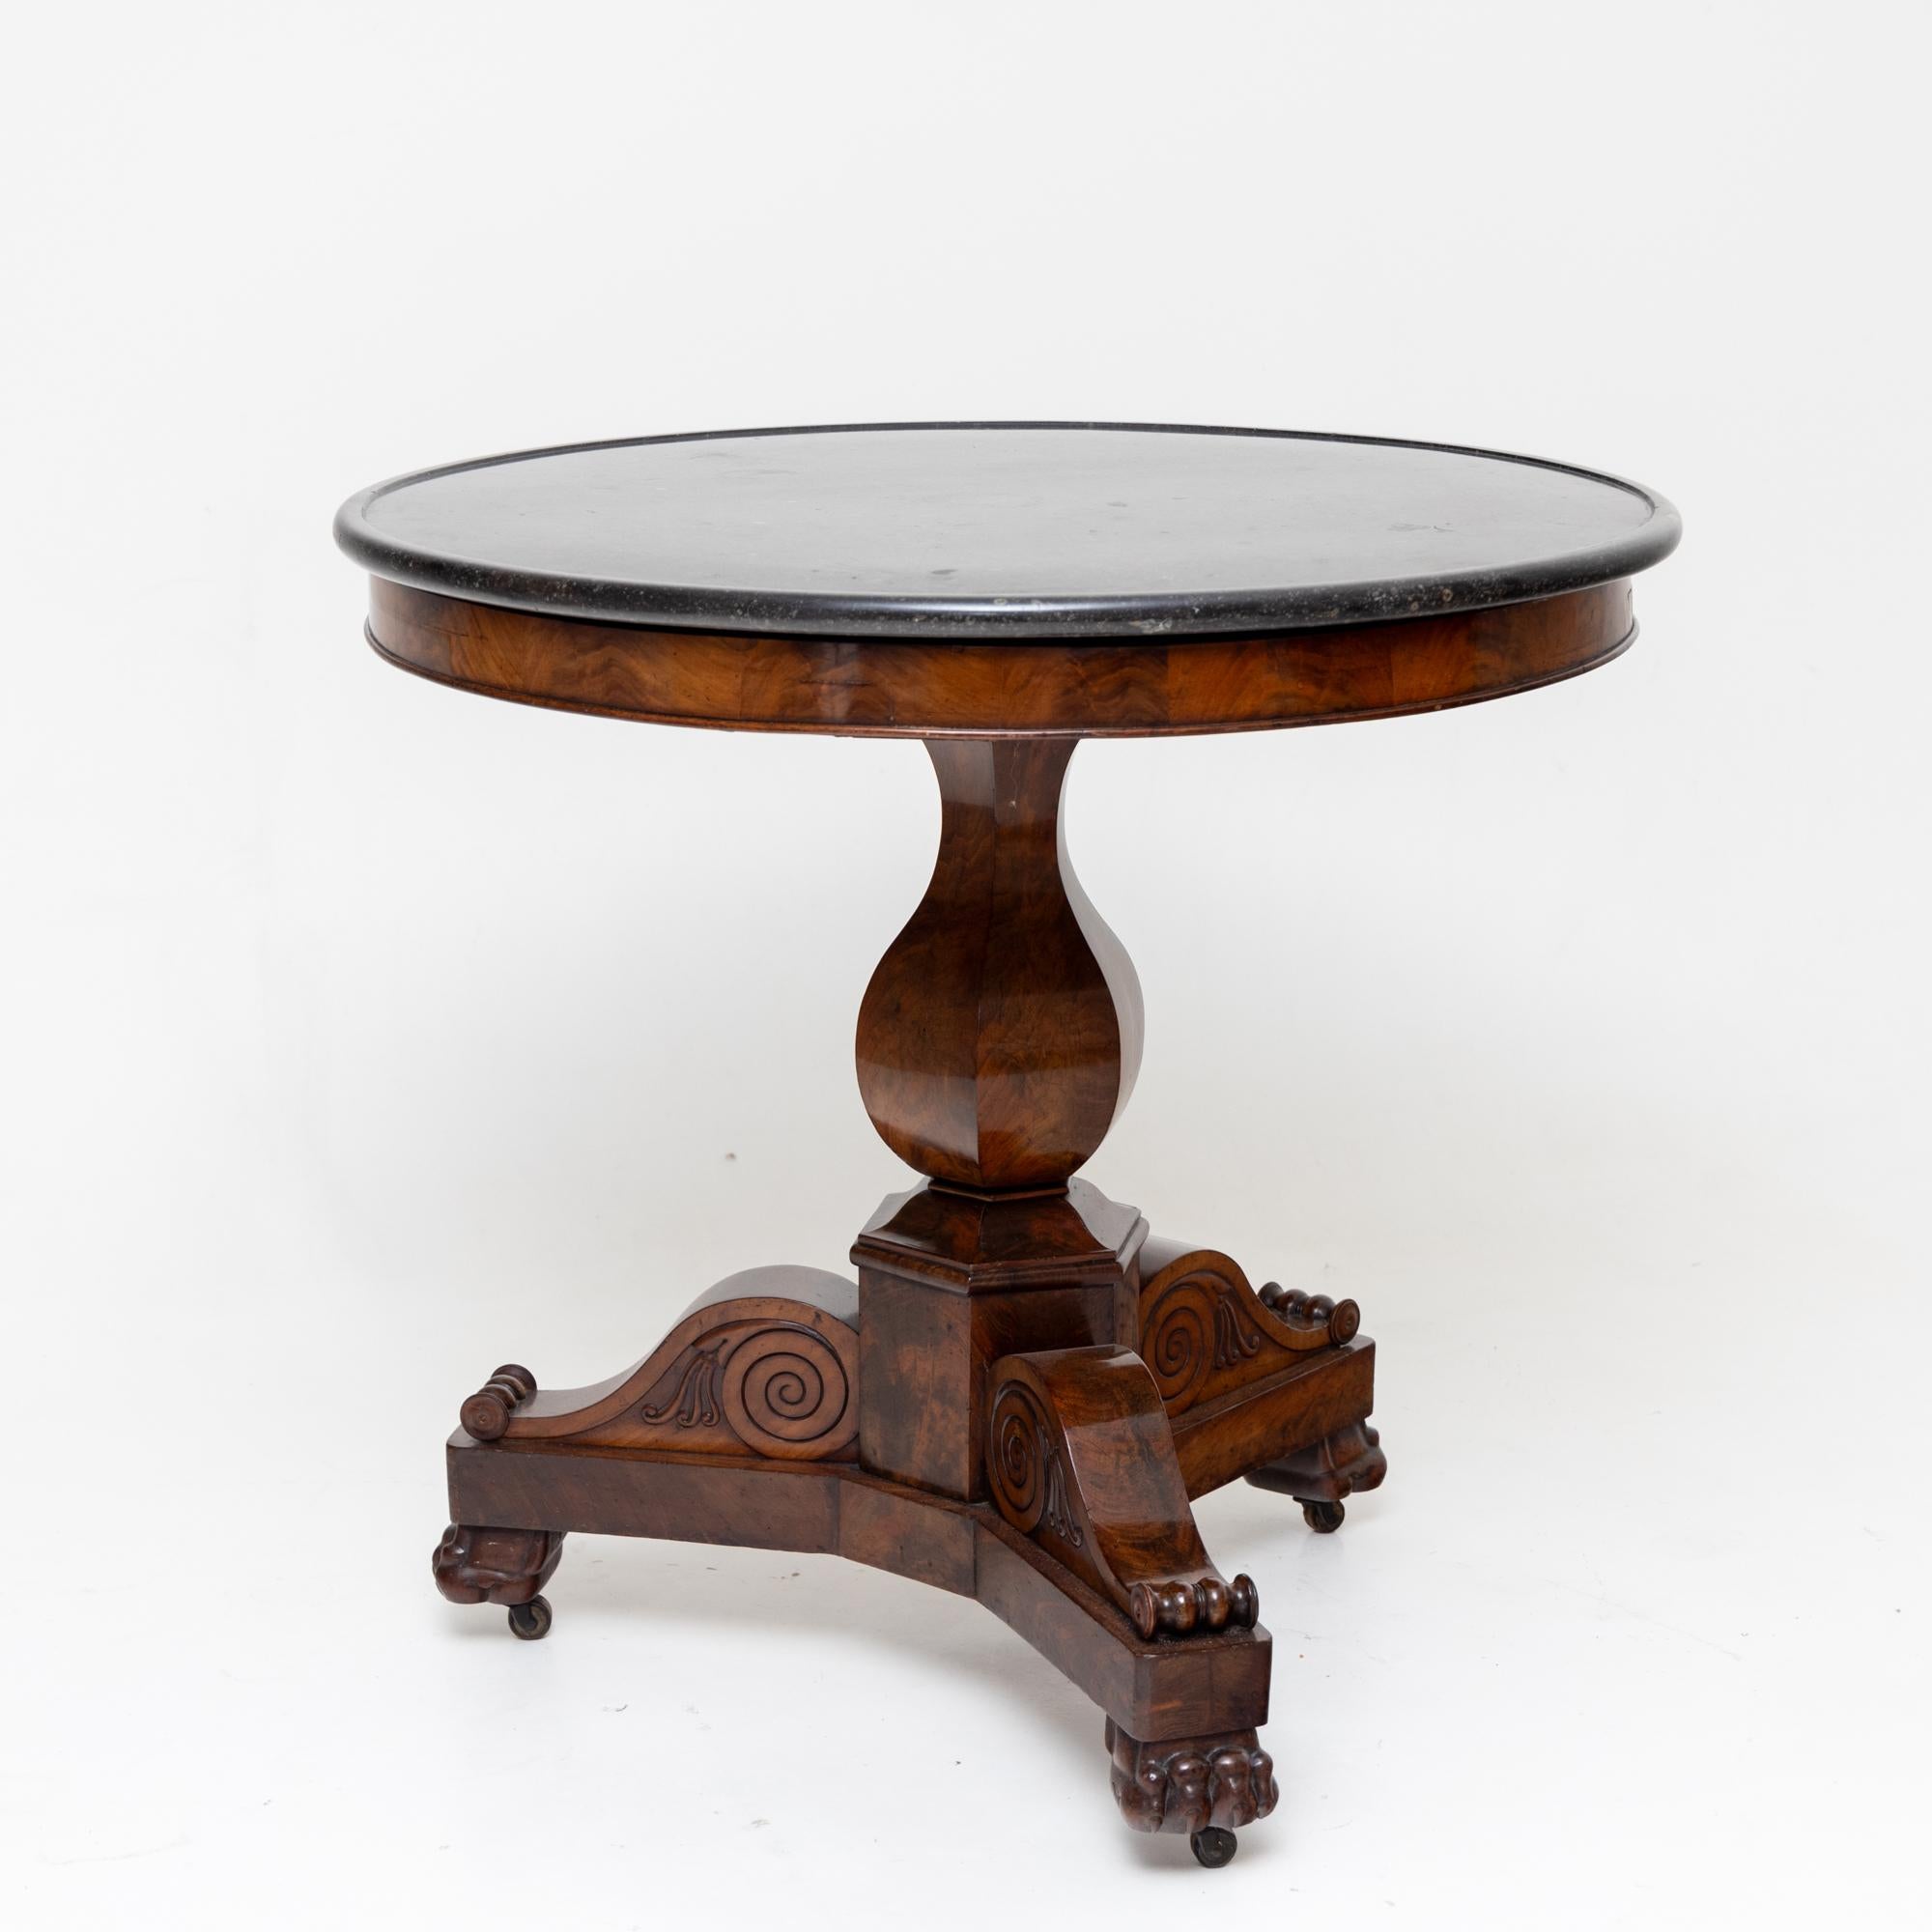 French side table on a three-legged base with lion paws and elaborately carved volutes. Above it rises a hexagonal, tulip-shaped shaft. The round granite top in dark grey rests on an elegant smooth frame with a discreet moulding. Small brass castors